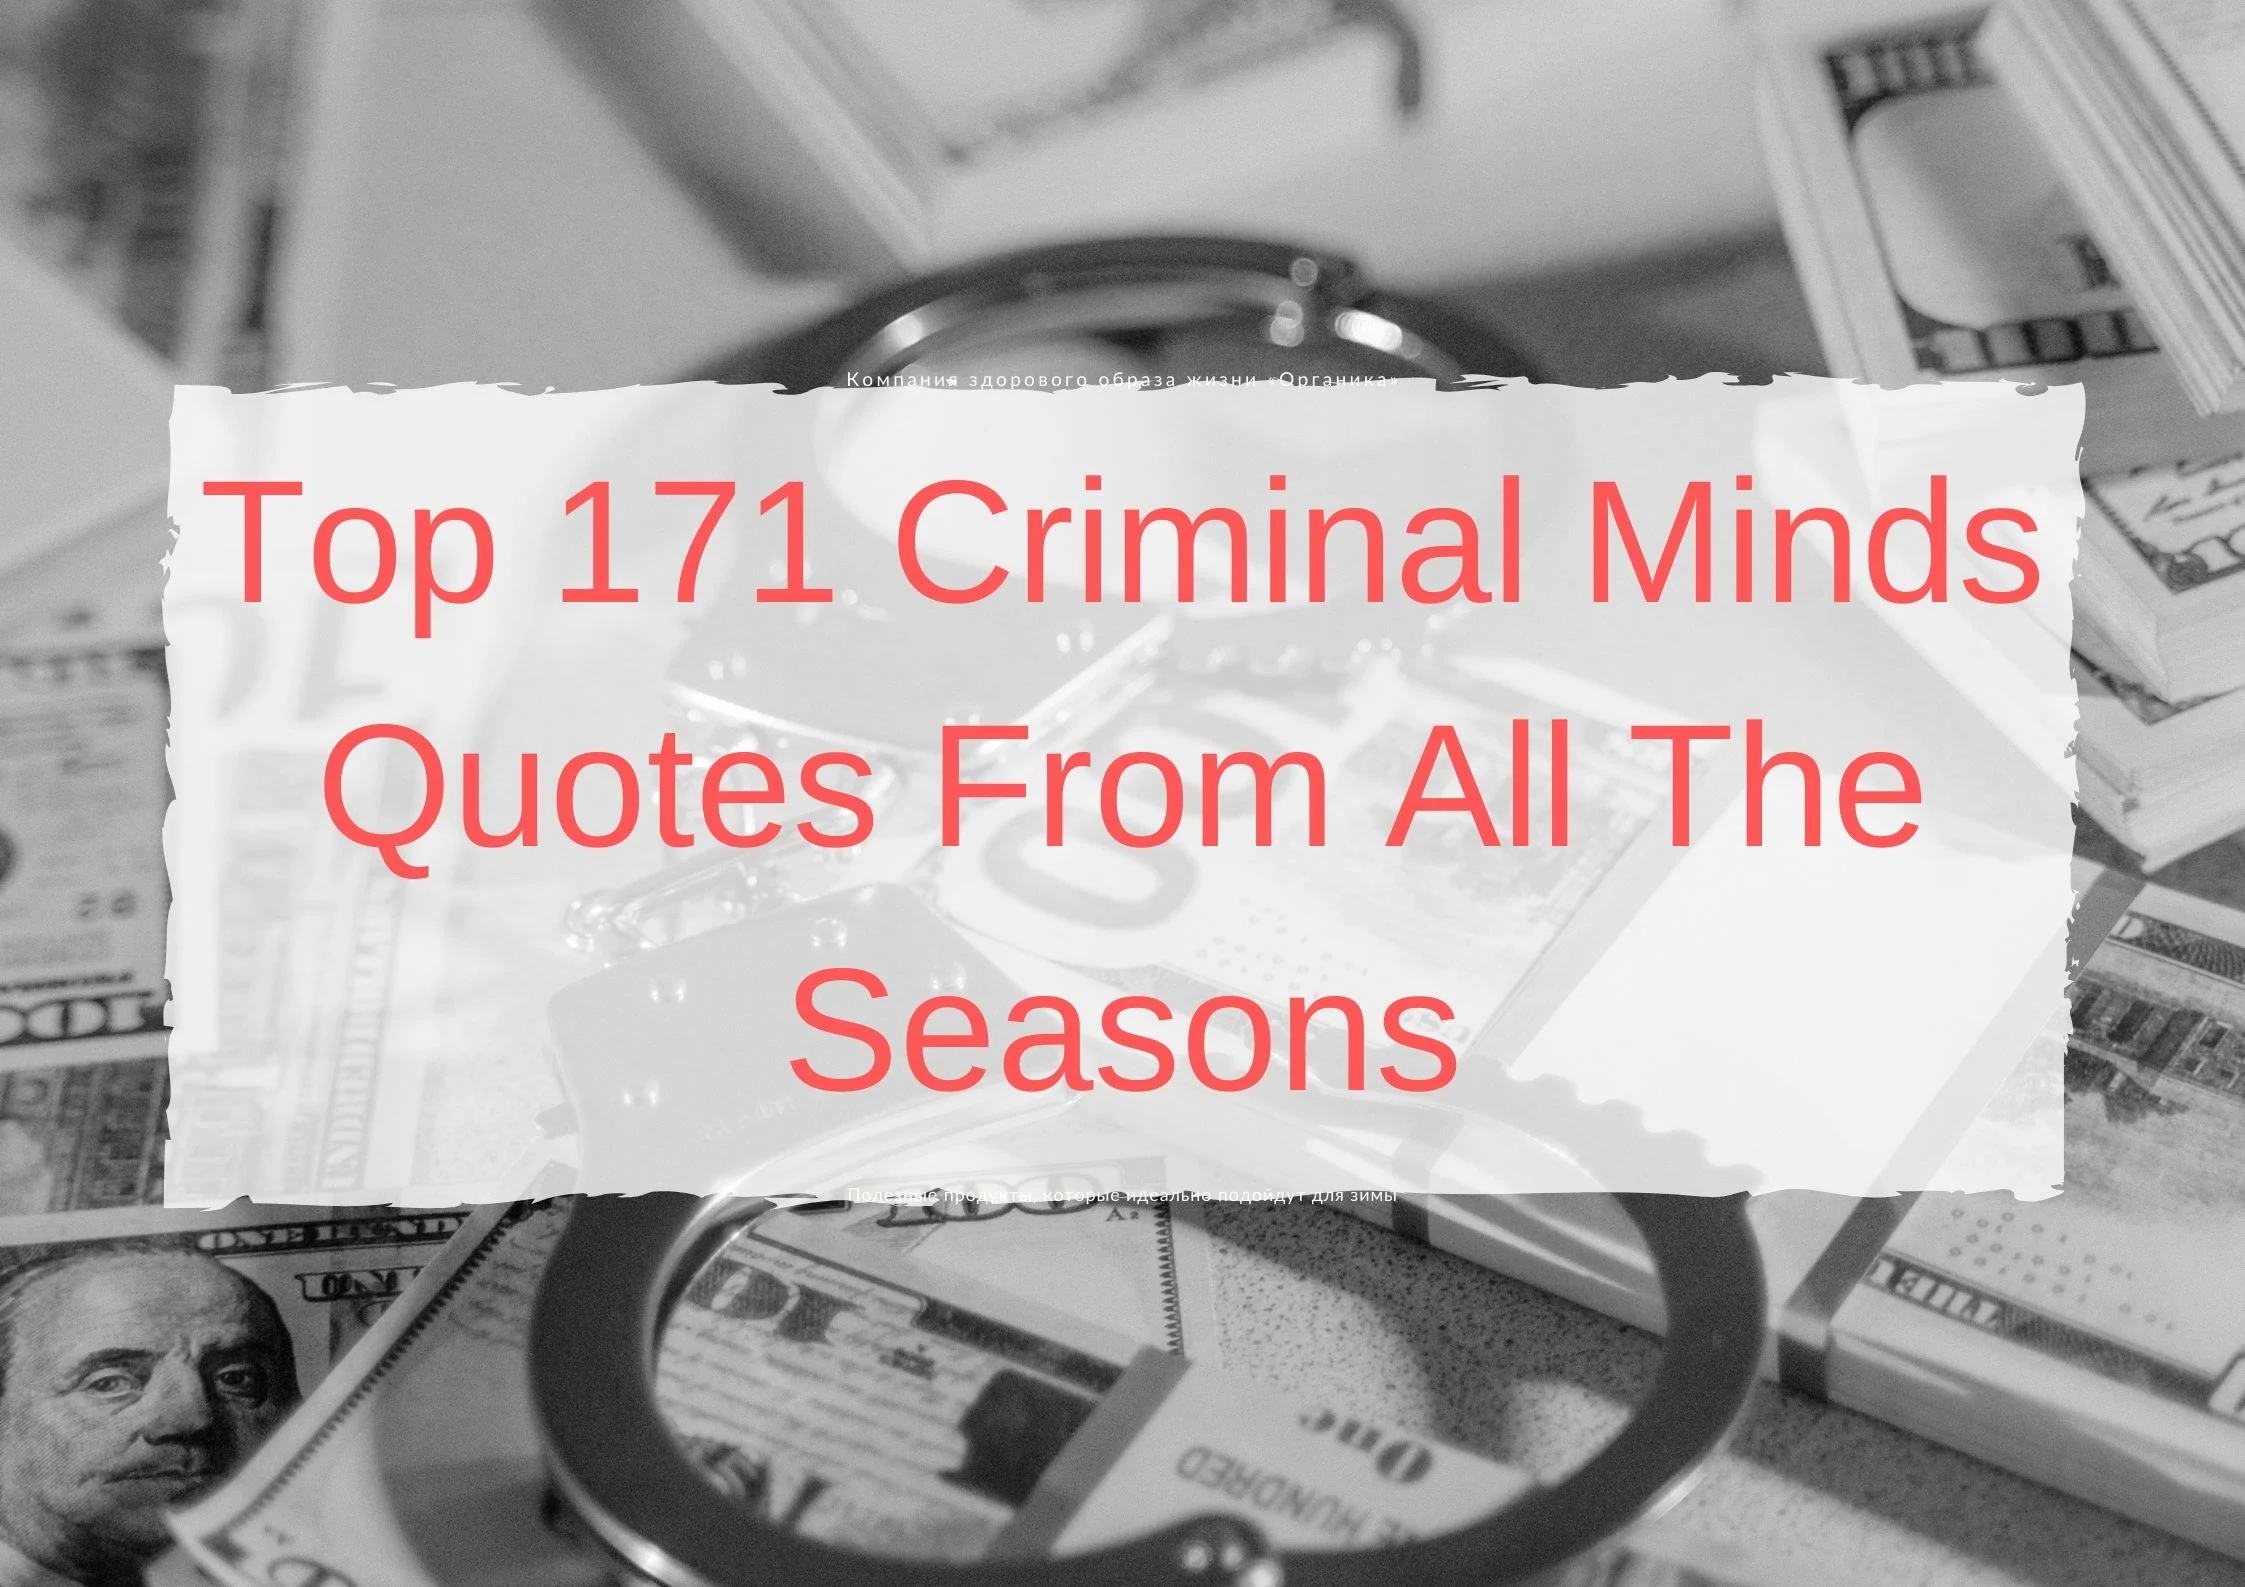 Top 171 Criminal Minds Quotes From All The Seasons